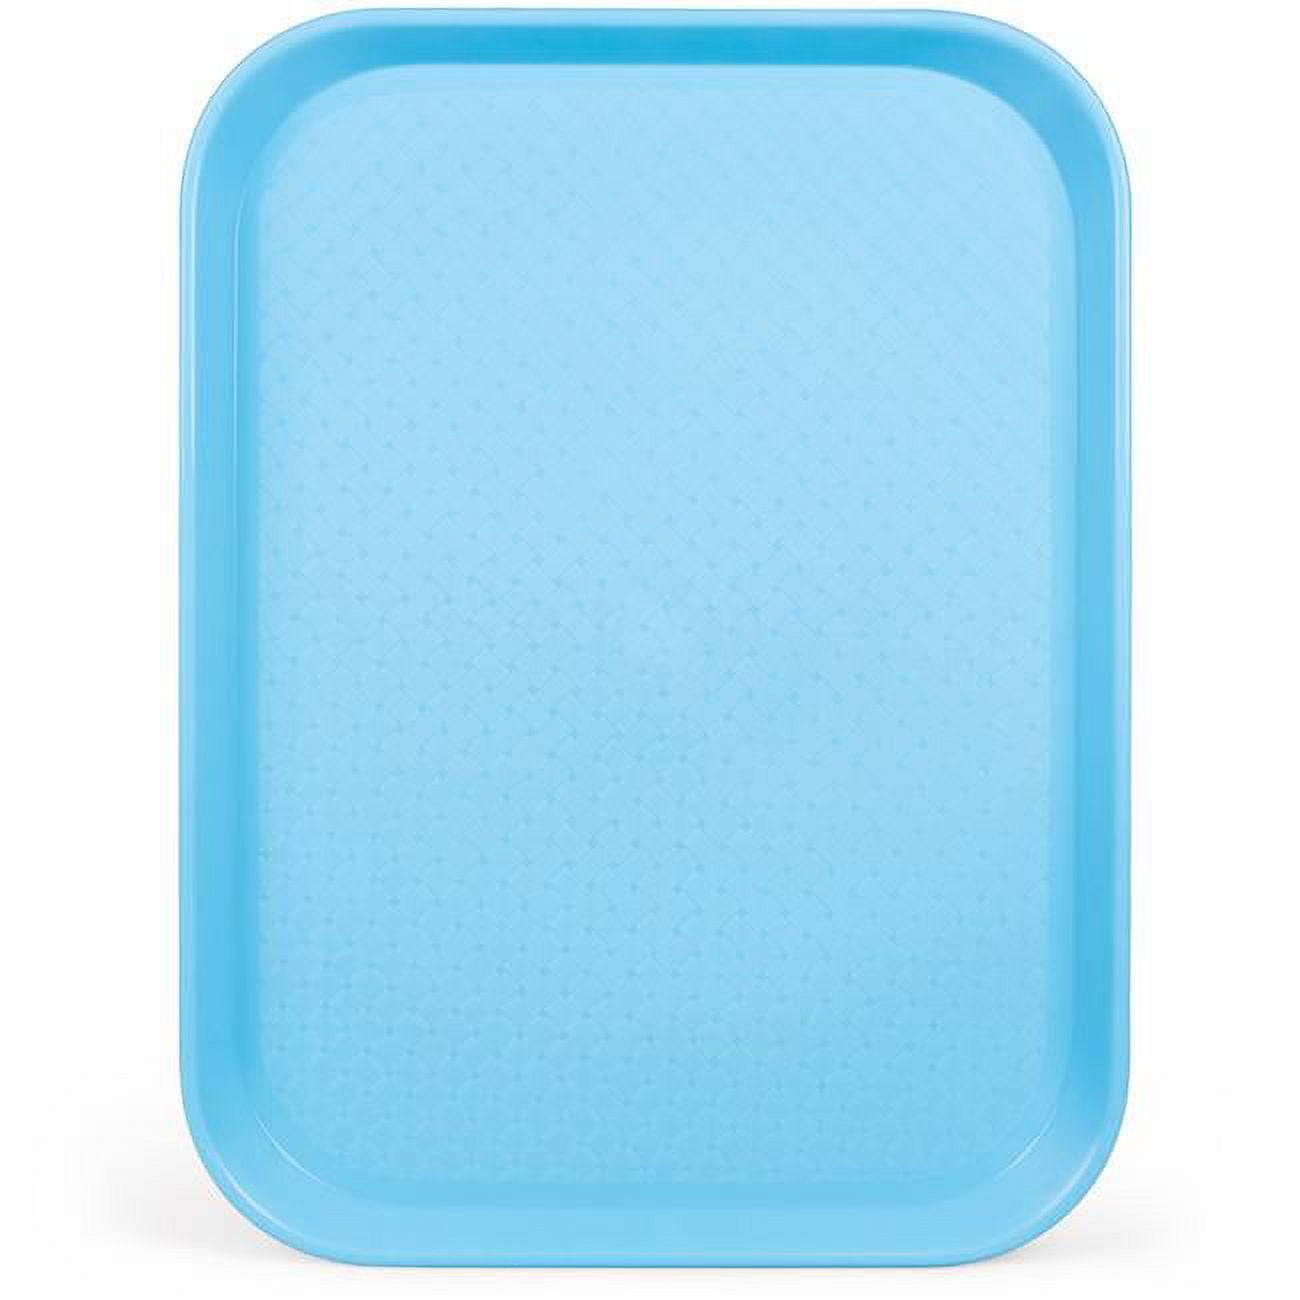 Kcaf-202 12 X 16 In. Cafeteria Tray, Blue